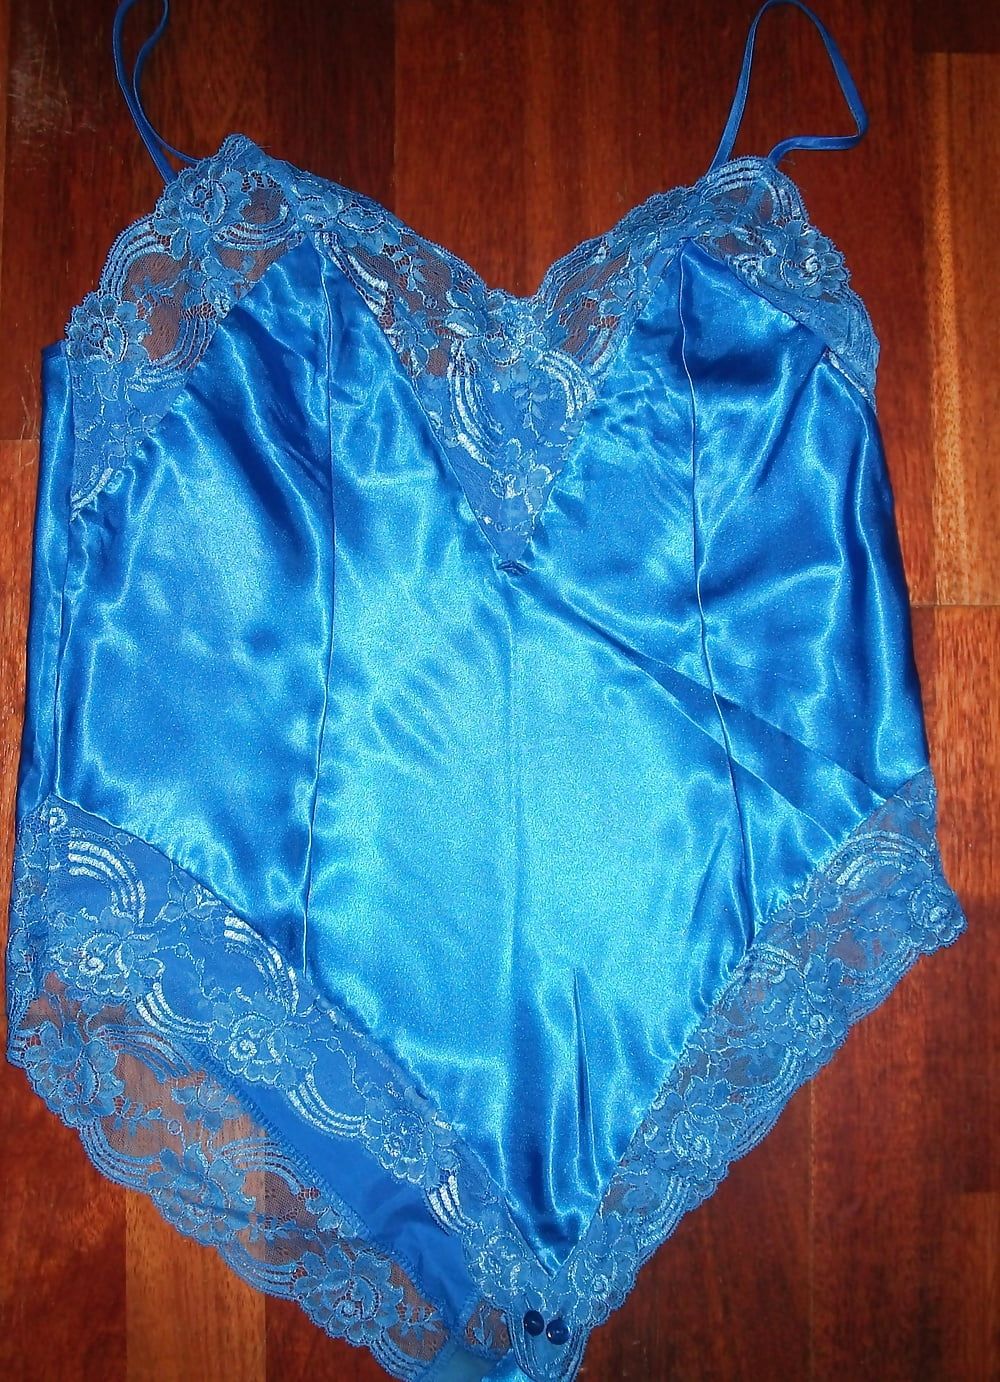 Misc satin. PM me if interested #4